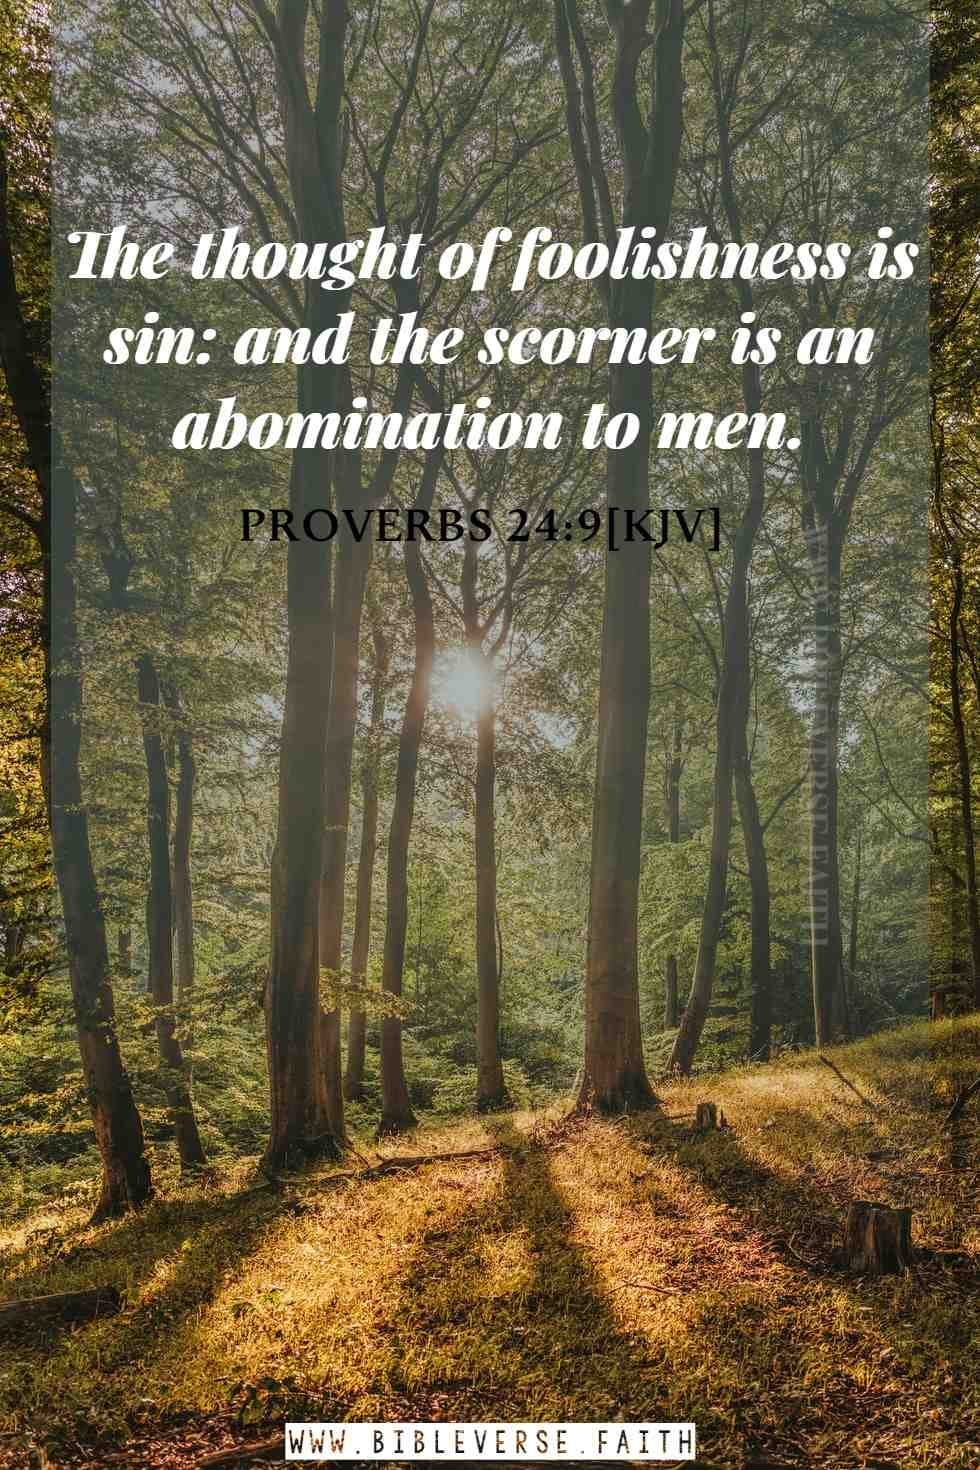 proverbs 24 9[kjv] abomination in the bible